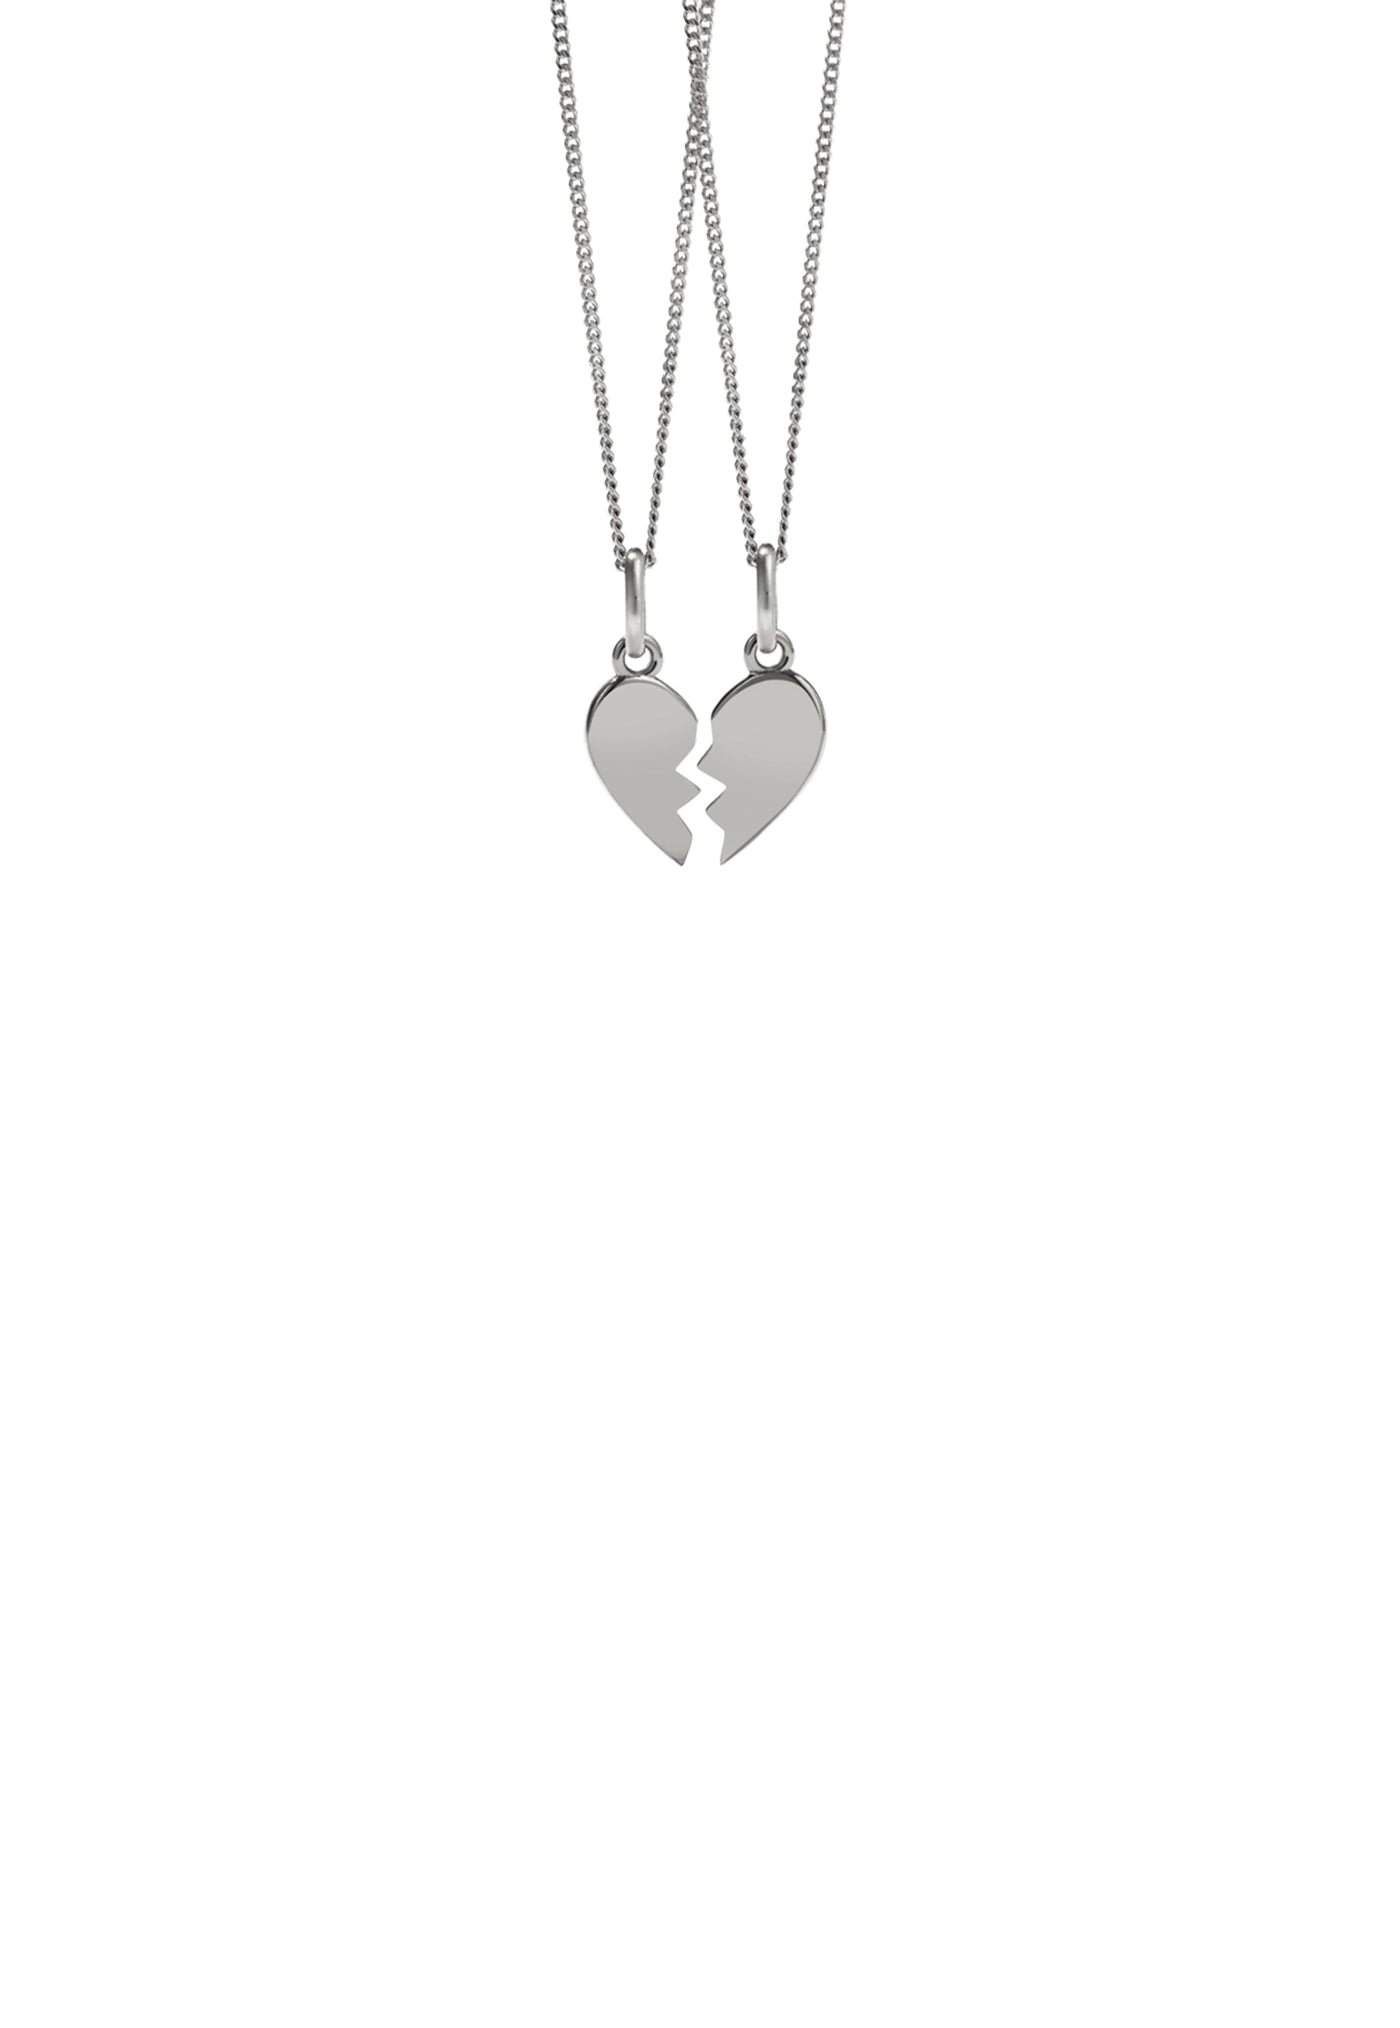 Broken Heart Charm Necklace sold by Angel Divine